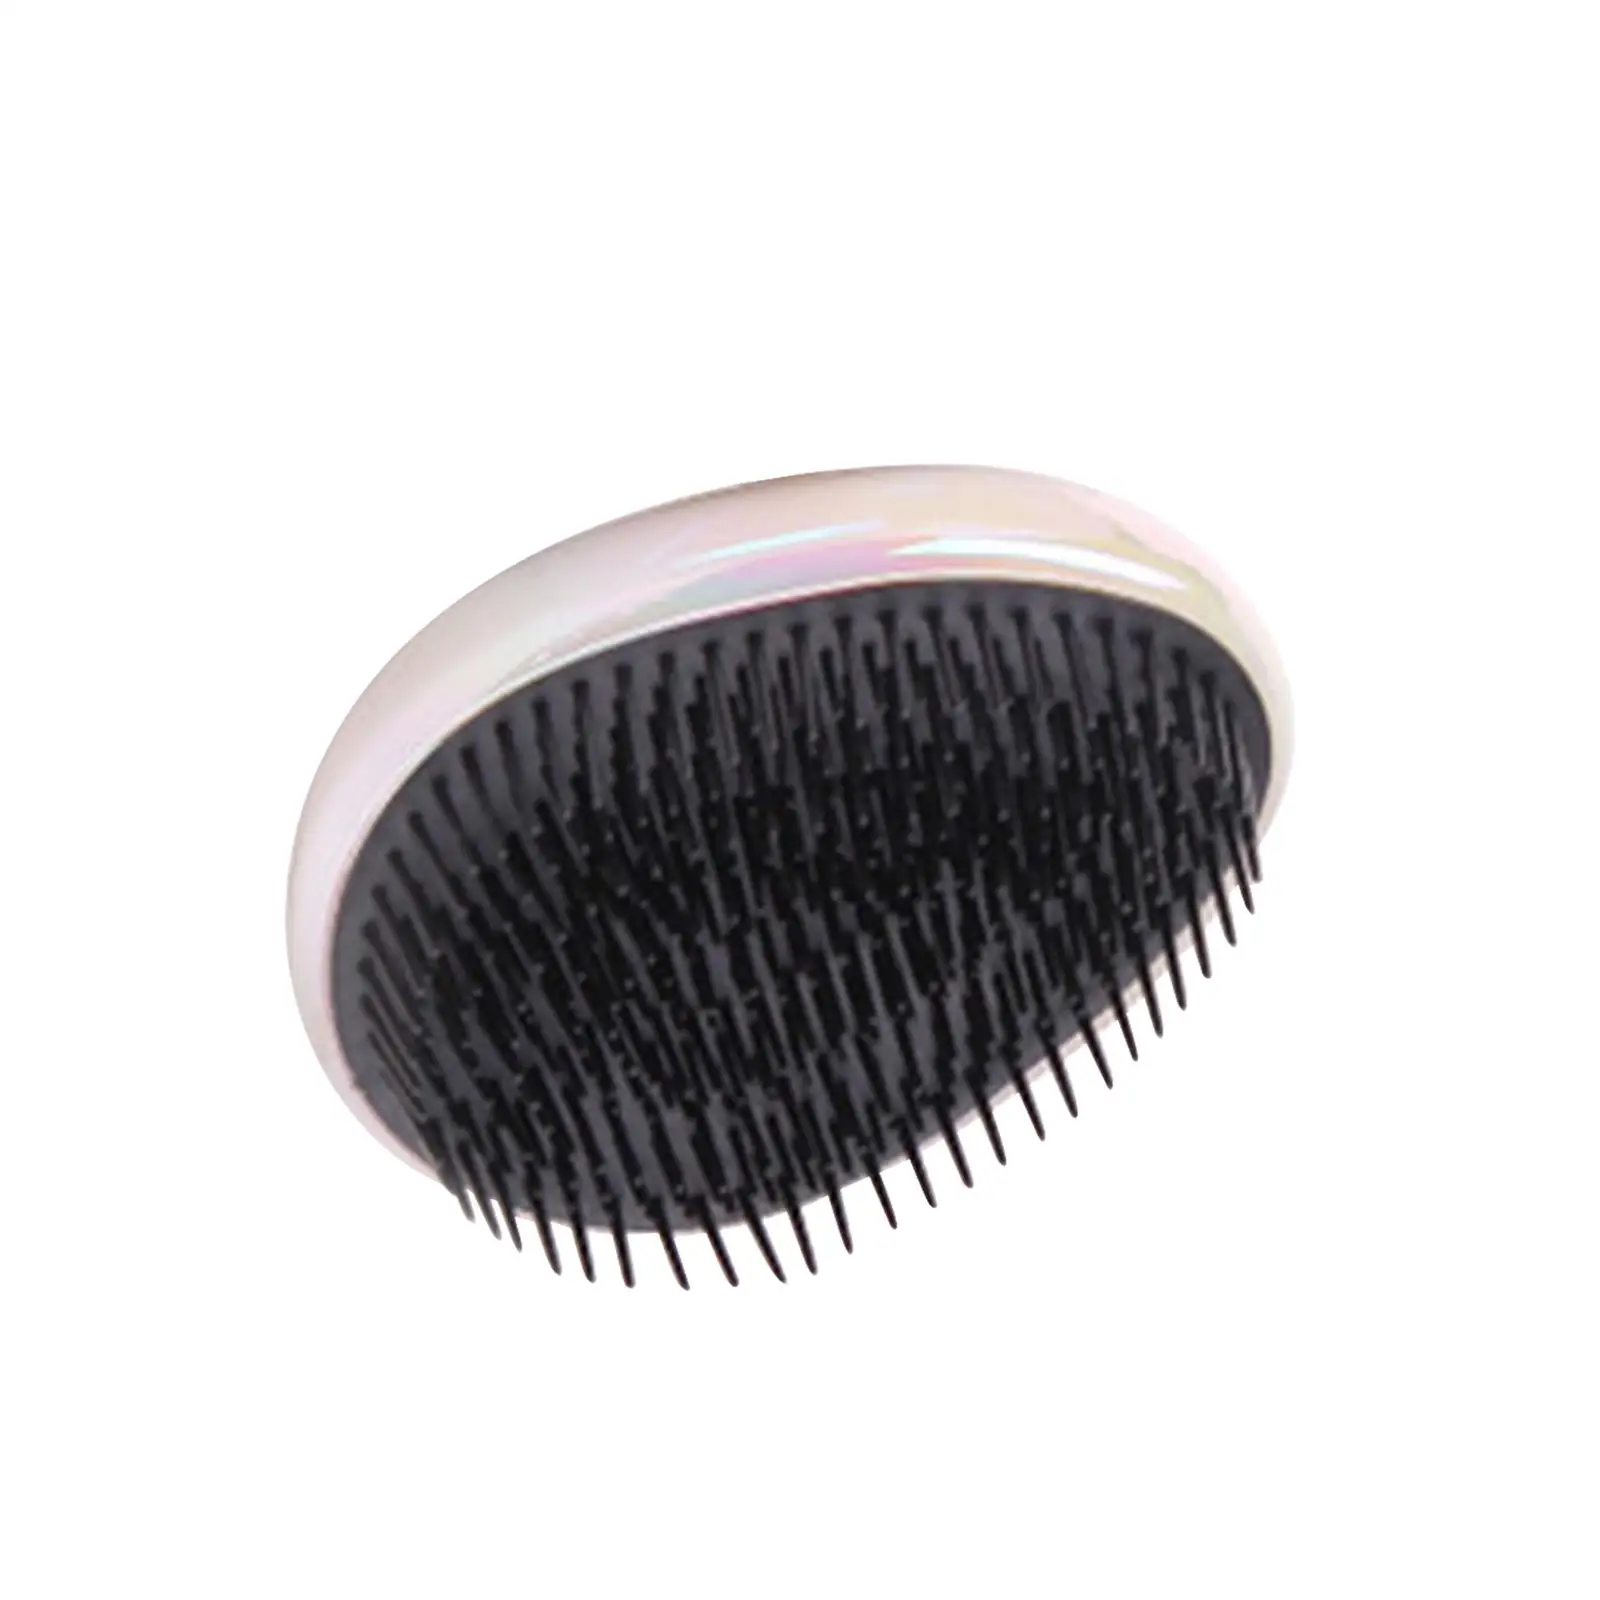 Portable Egg Shaped Hair Brush Air Cushion Massage Brush Scalp Massage Comb Hair Styling Tools for Wavy Curly Hair Women Adults